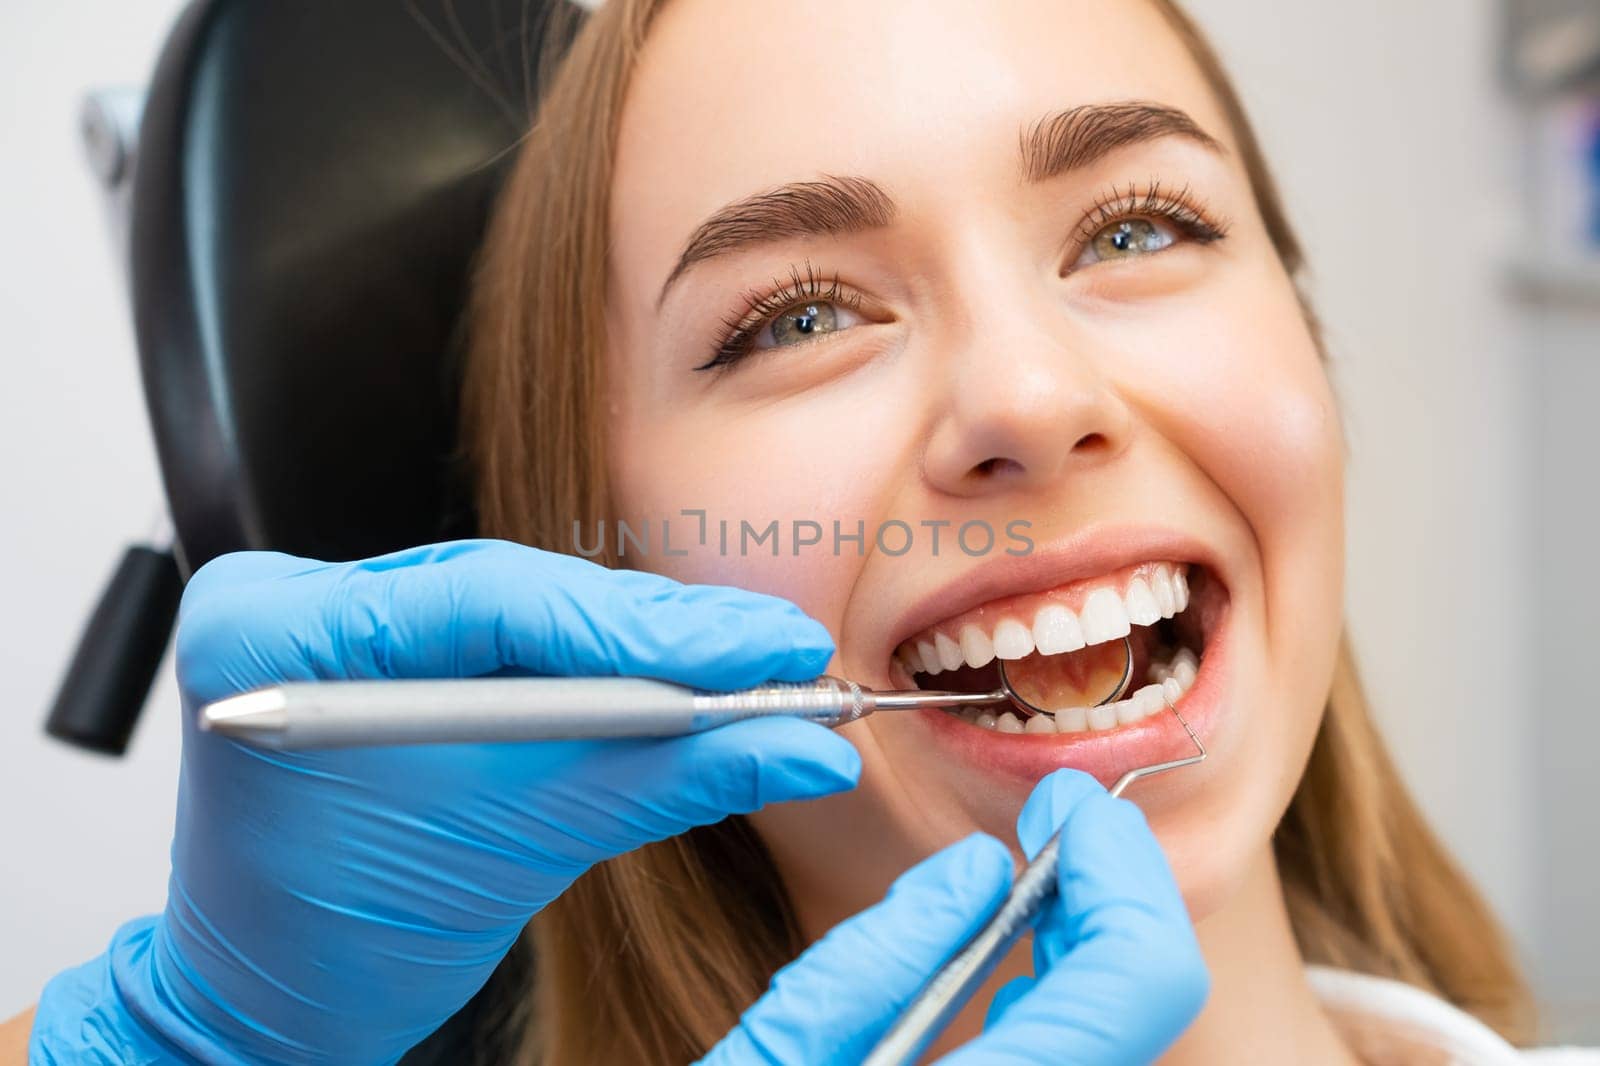 The dentist uses a small mirror and dental probe to inspect the patients teeth and gums. by vladimka